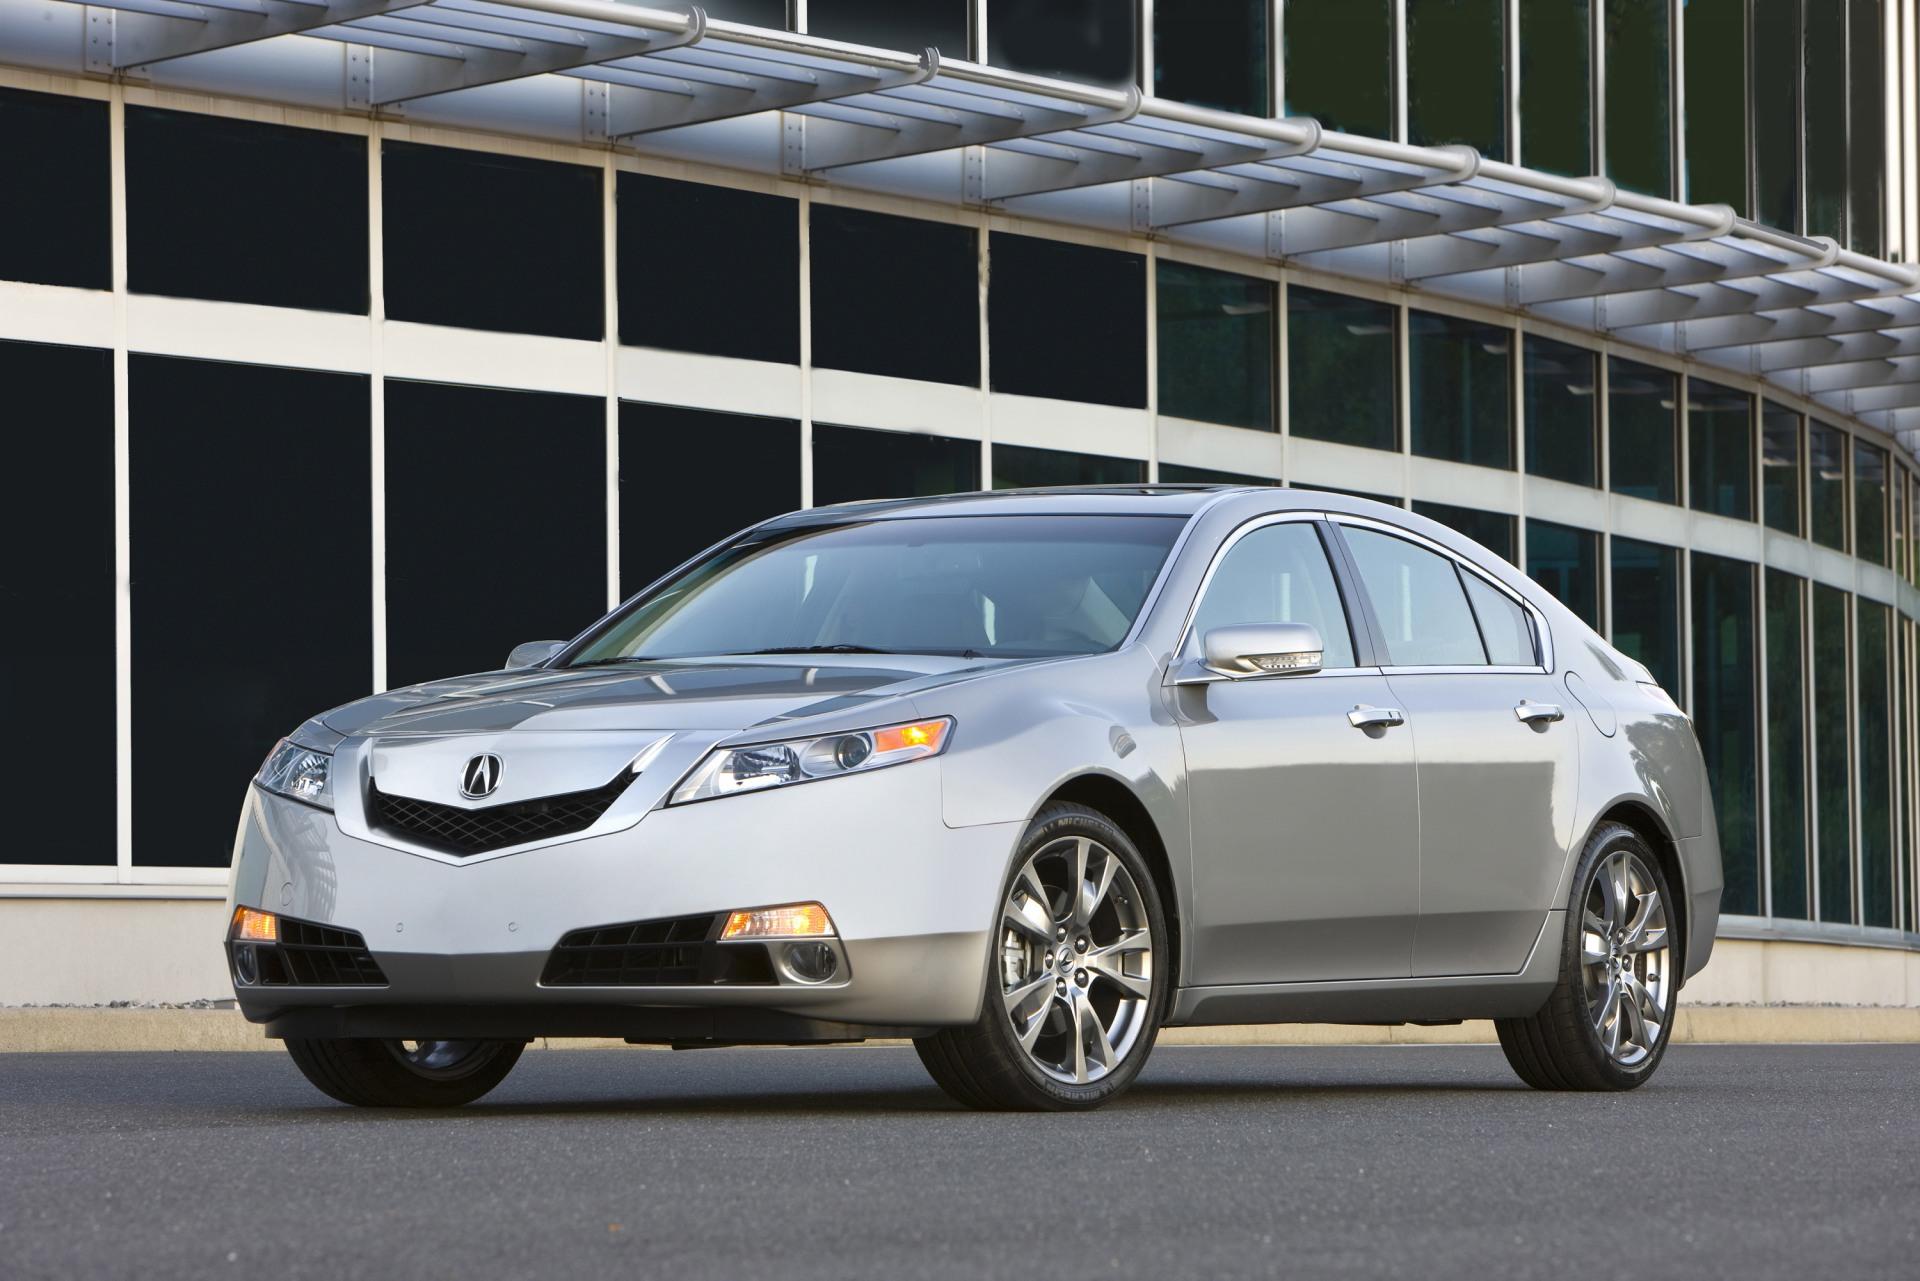 2009 Acura Tl News And Information